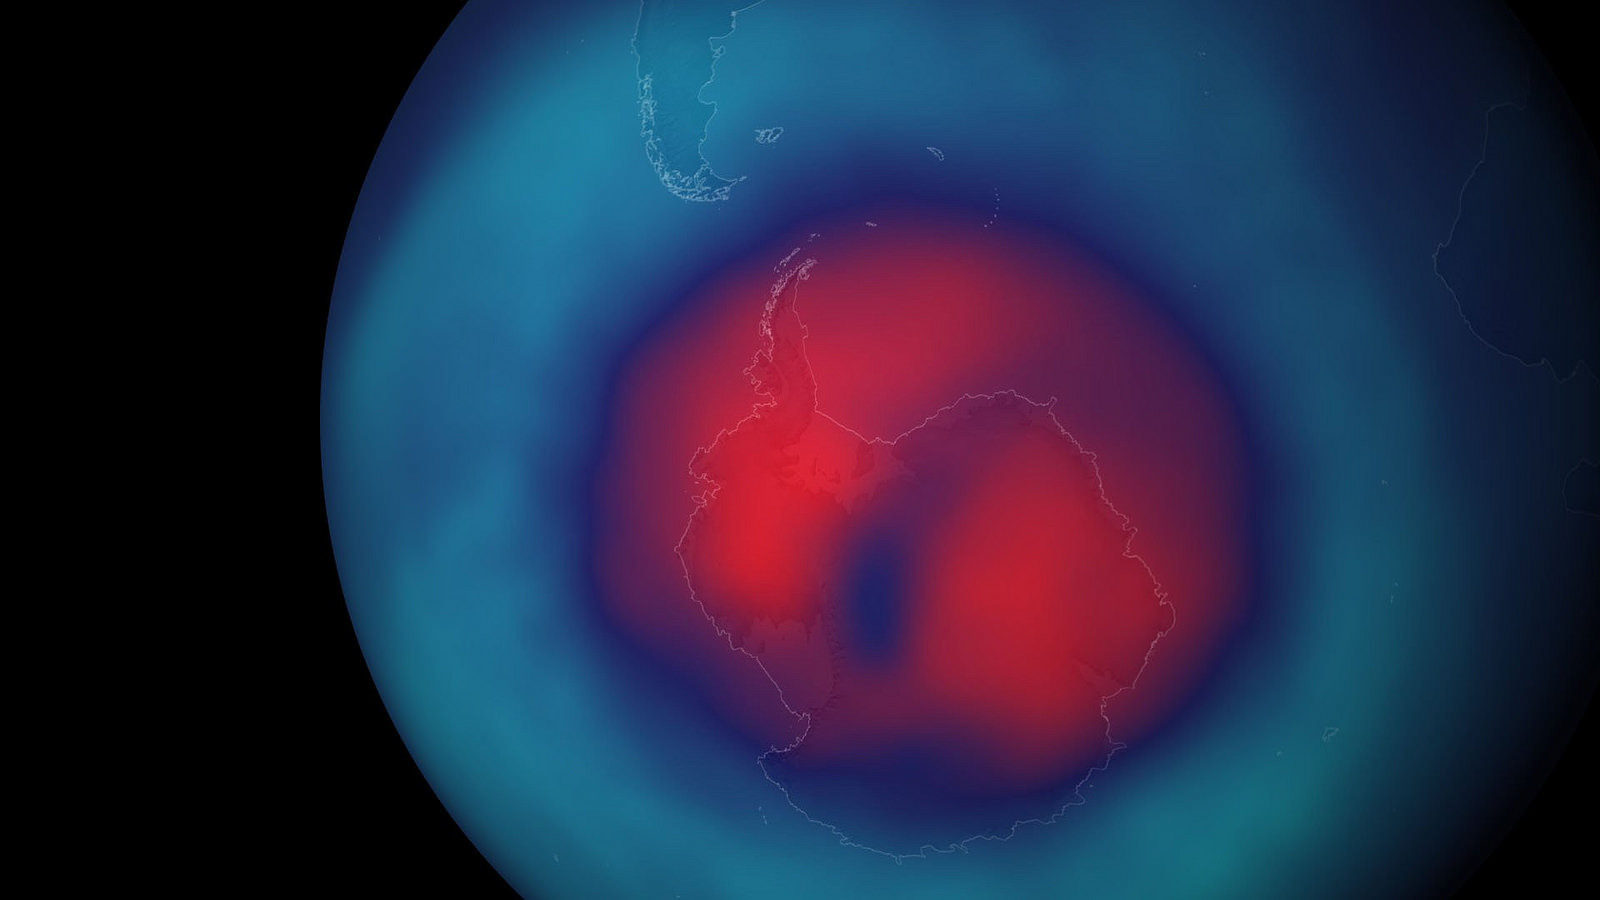 Everyone talks about the hole in the ozone layer and use it as a tool to bring about change in the way the world conducts itself. Did you know that hole is twice the size of Europe?